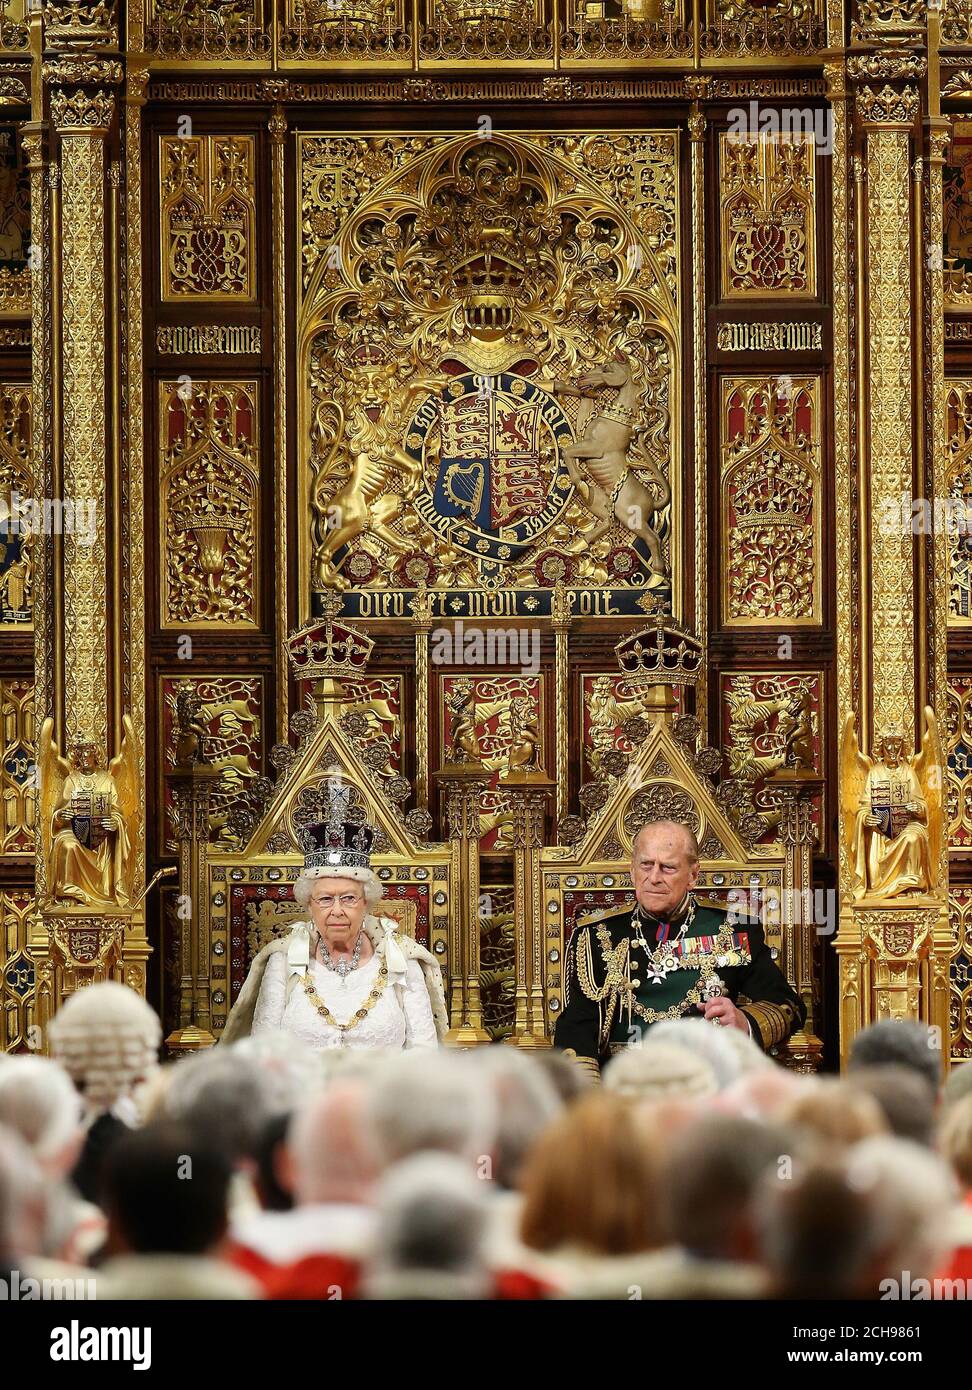 Queen Elizabeth II during the State Opening of Parliament, in the House of Lords at the Palace of Westminster in London. Stock Photo